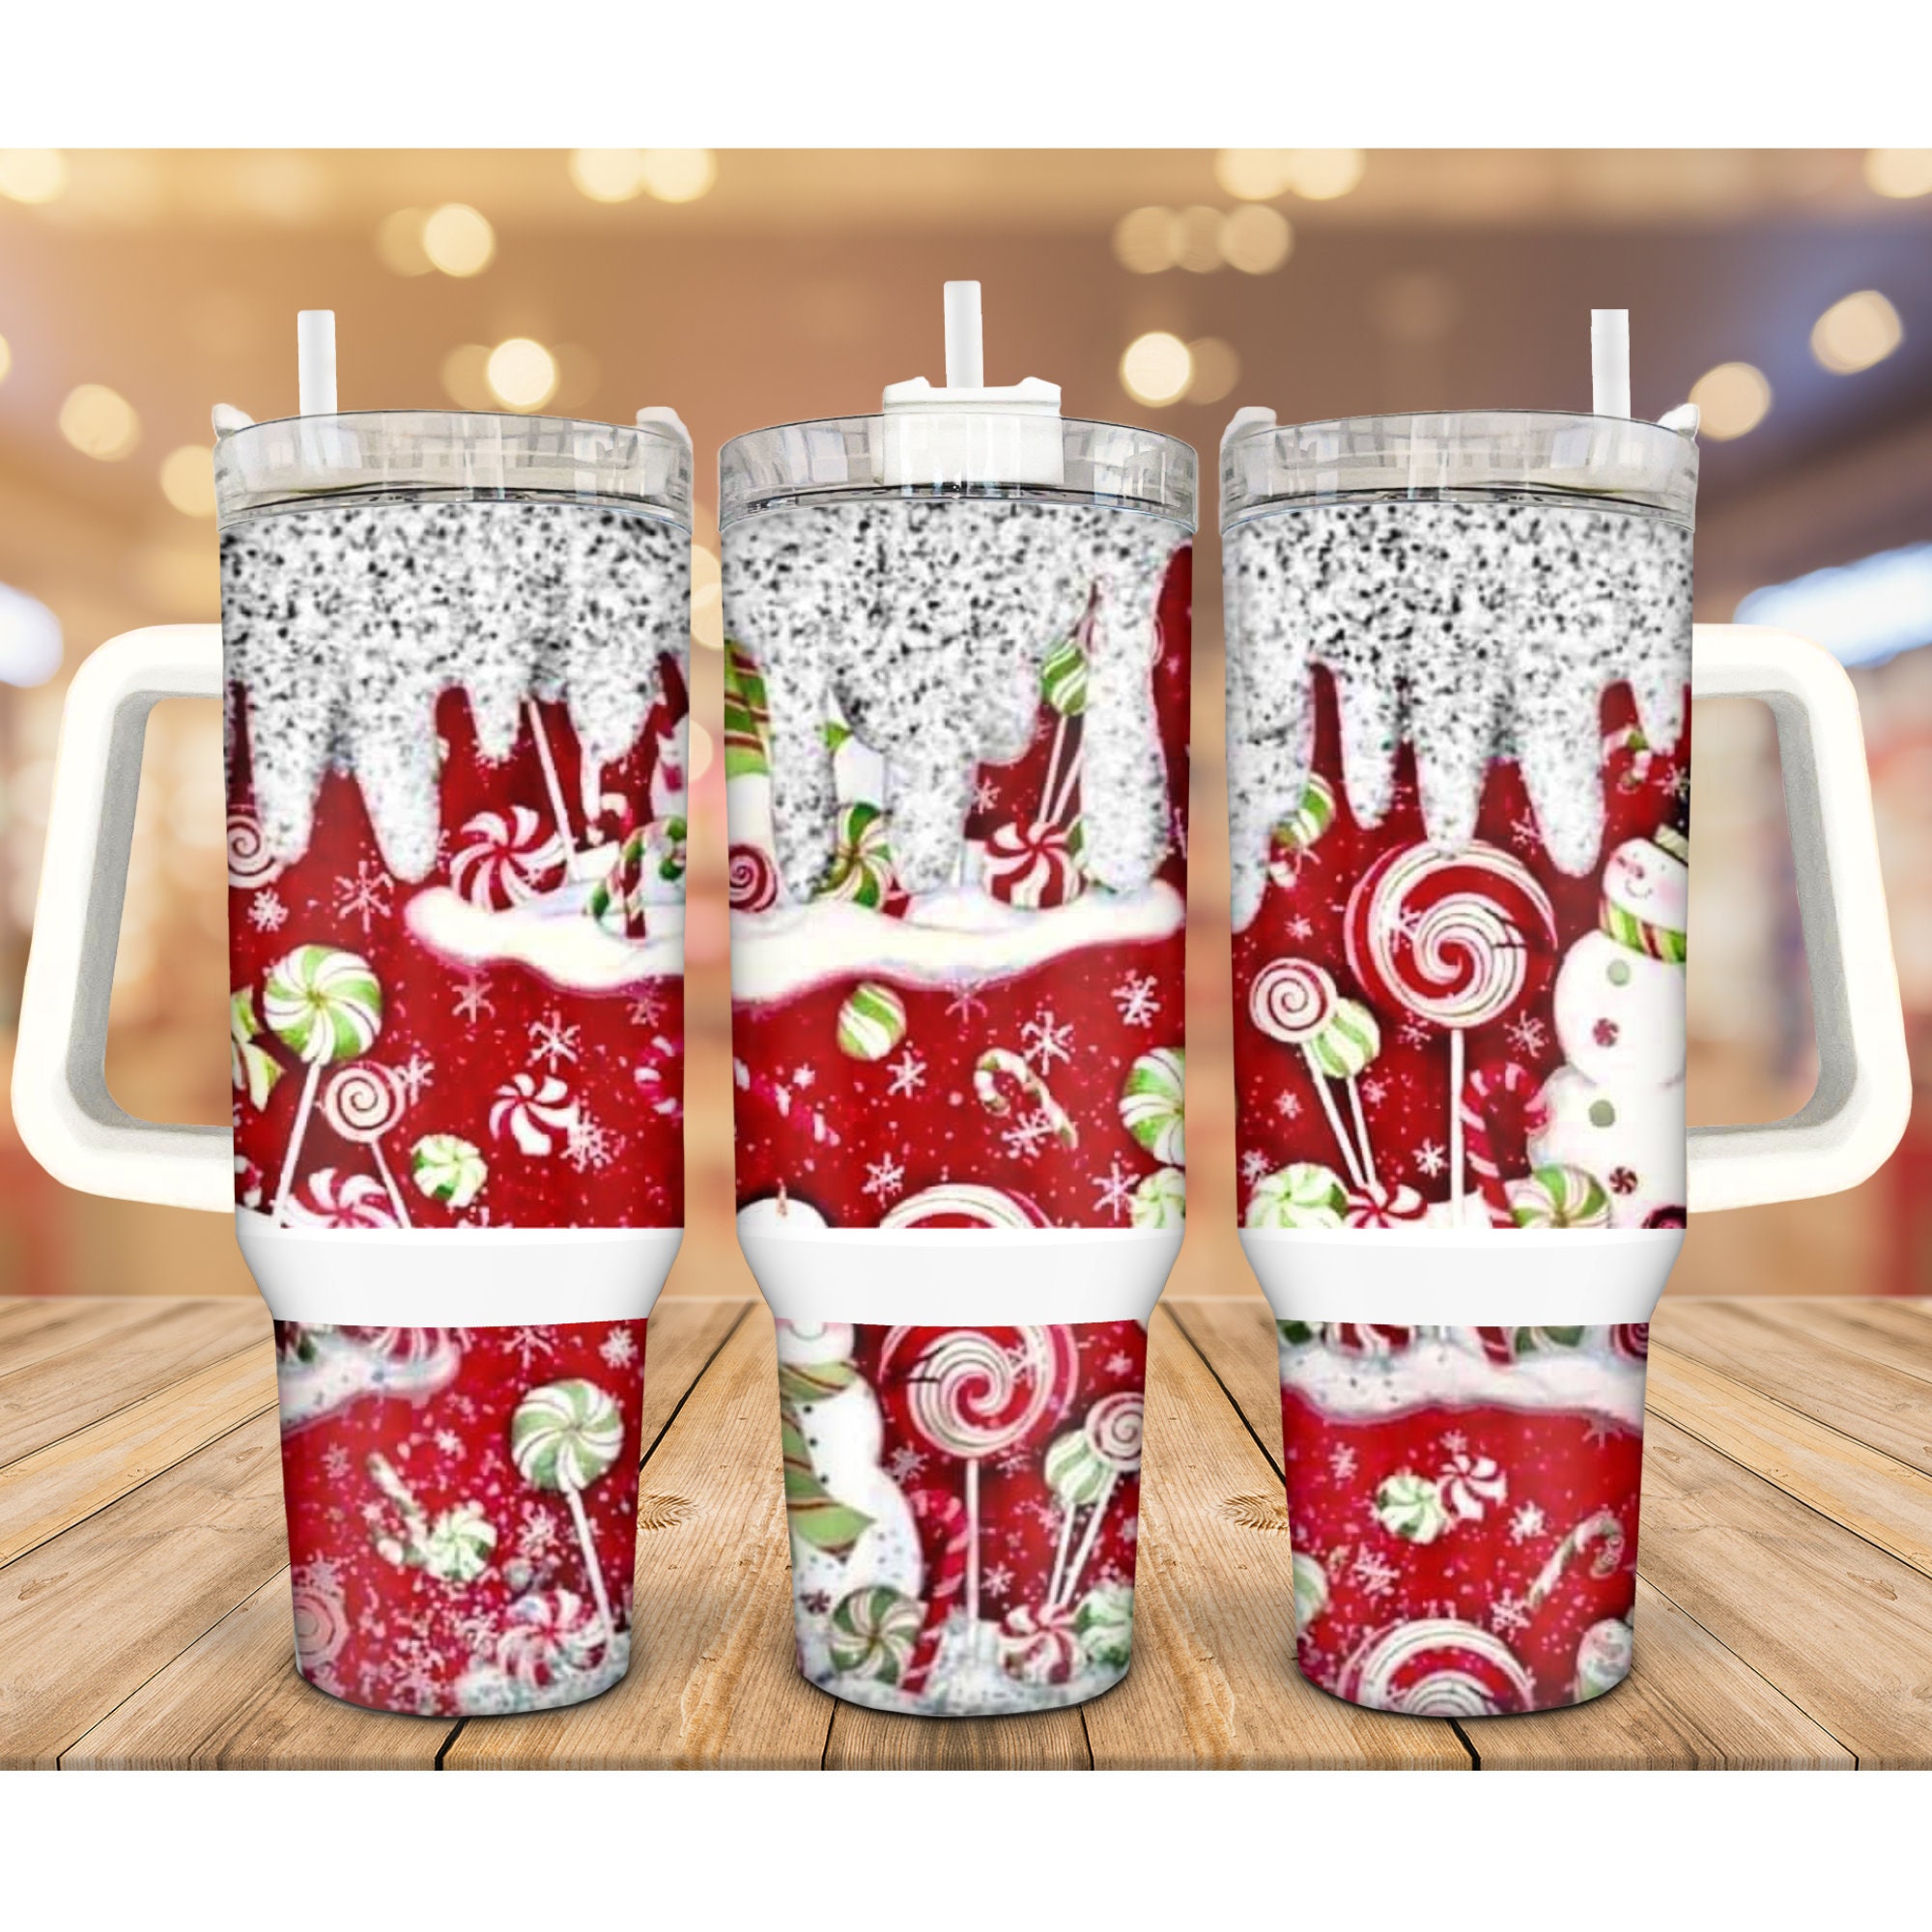 Stanley Just Released a New Holiday Tumbler With a Candy Cane Decorated  Straw